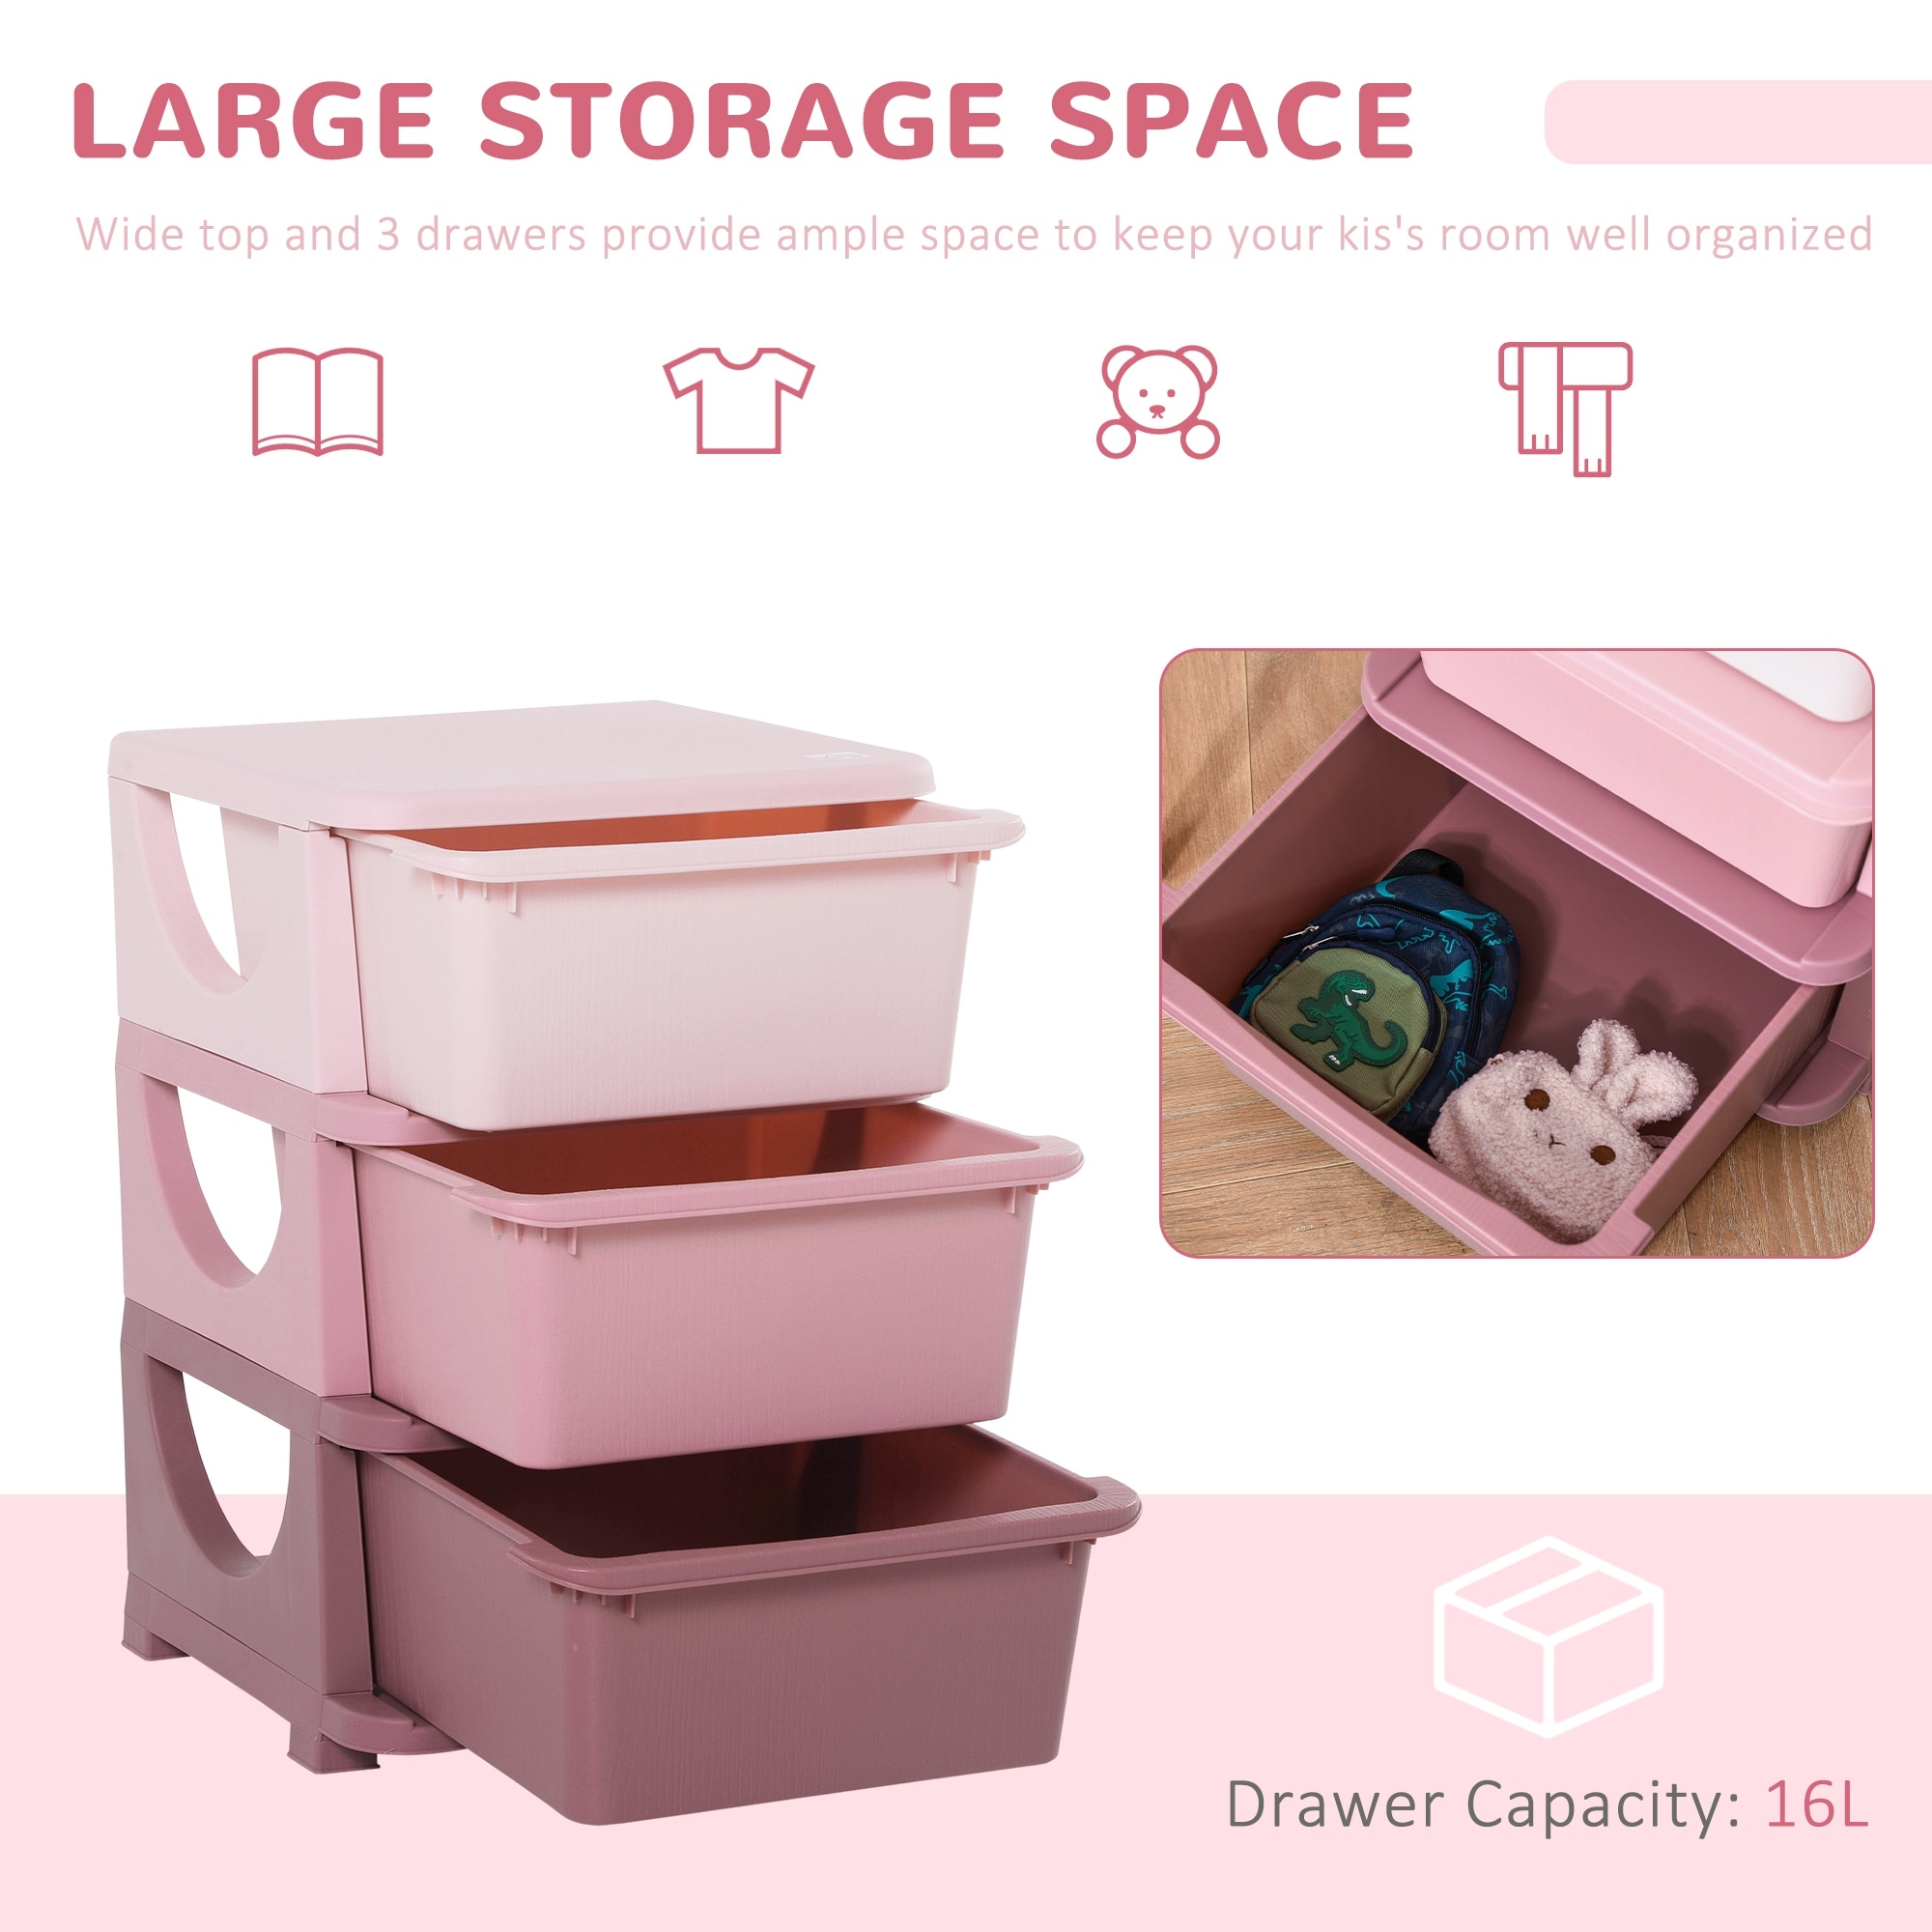 https://ak1.ostkcdn.com/images/products/is/images/direct/1f5de4ebd05e40dd4858d4b2ca7e2e8ab8d4fac7/Qaba-Kids-Storage-Unit-Dresser-Tower-with-Drawers-3-Tier-Chest-Toy-Organizer-for-Bedroom-Kindergarten-for-Boys-Girls-Toddlers.jpg